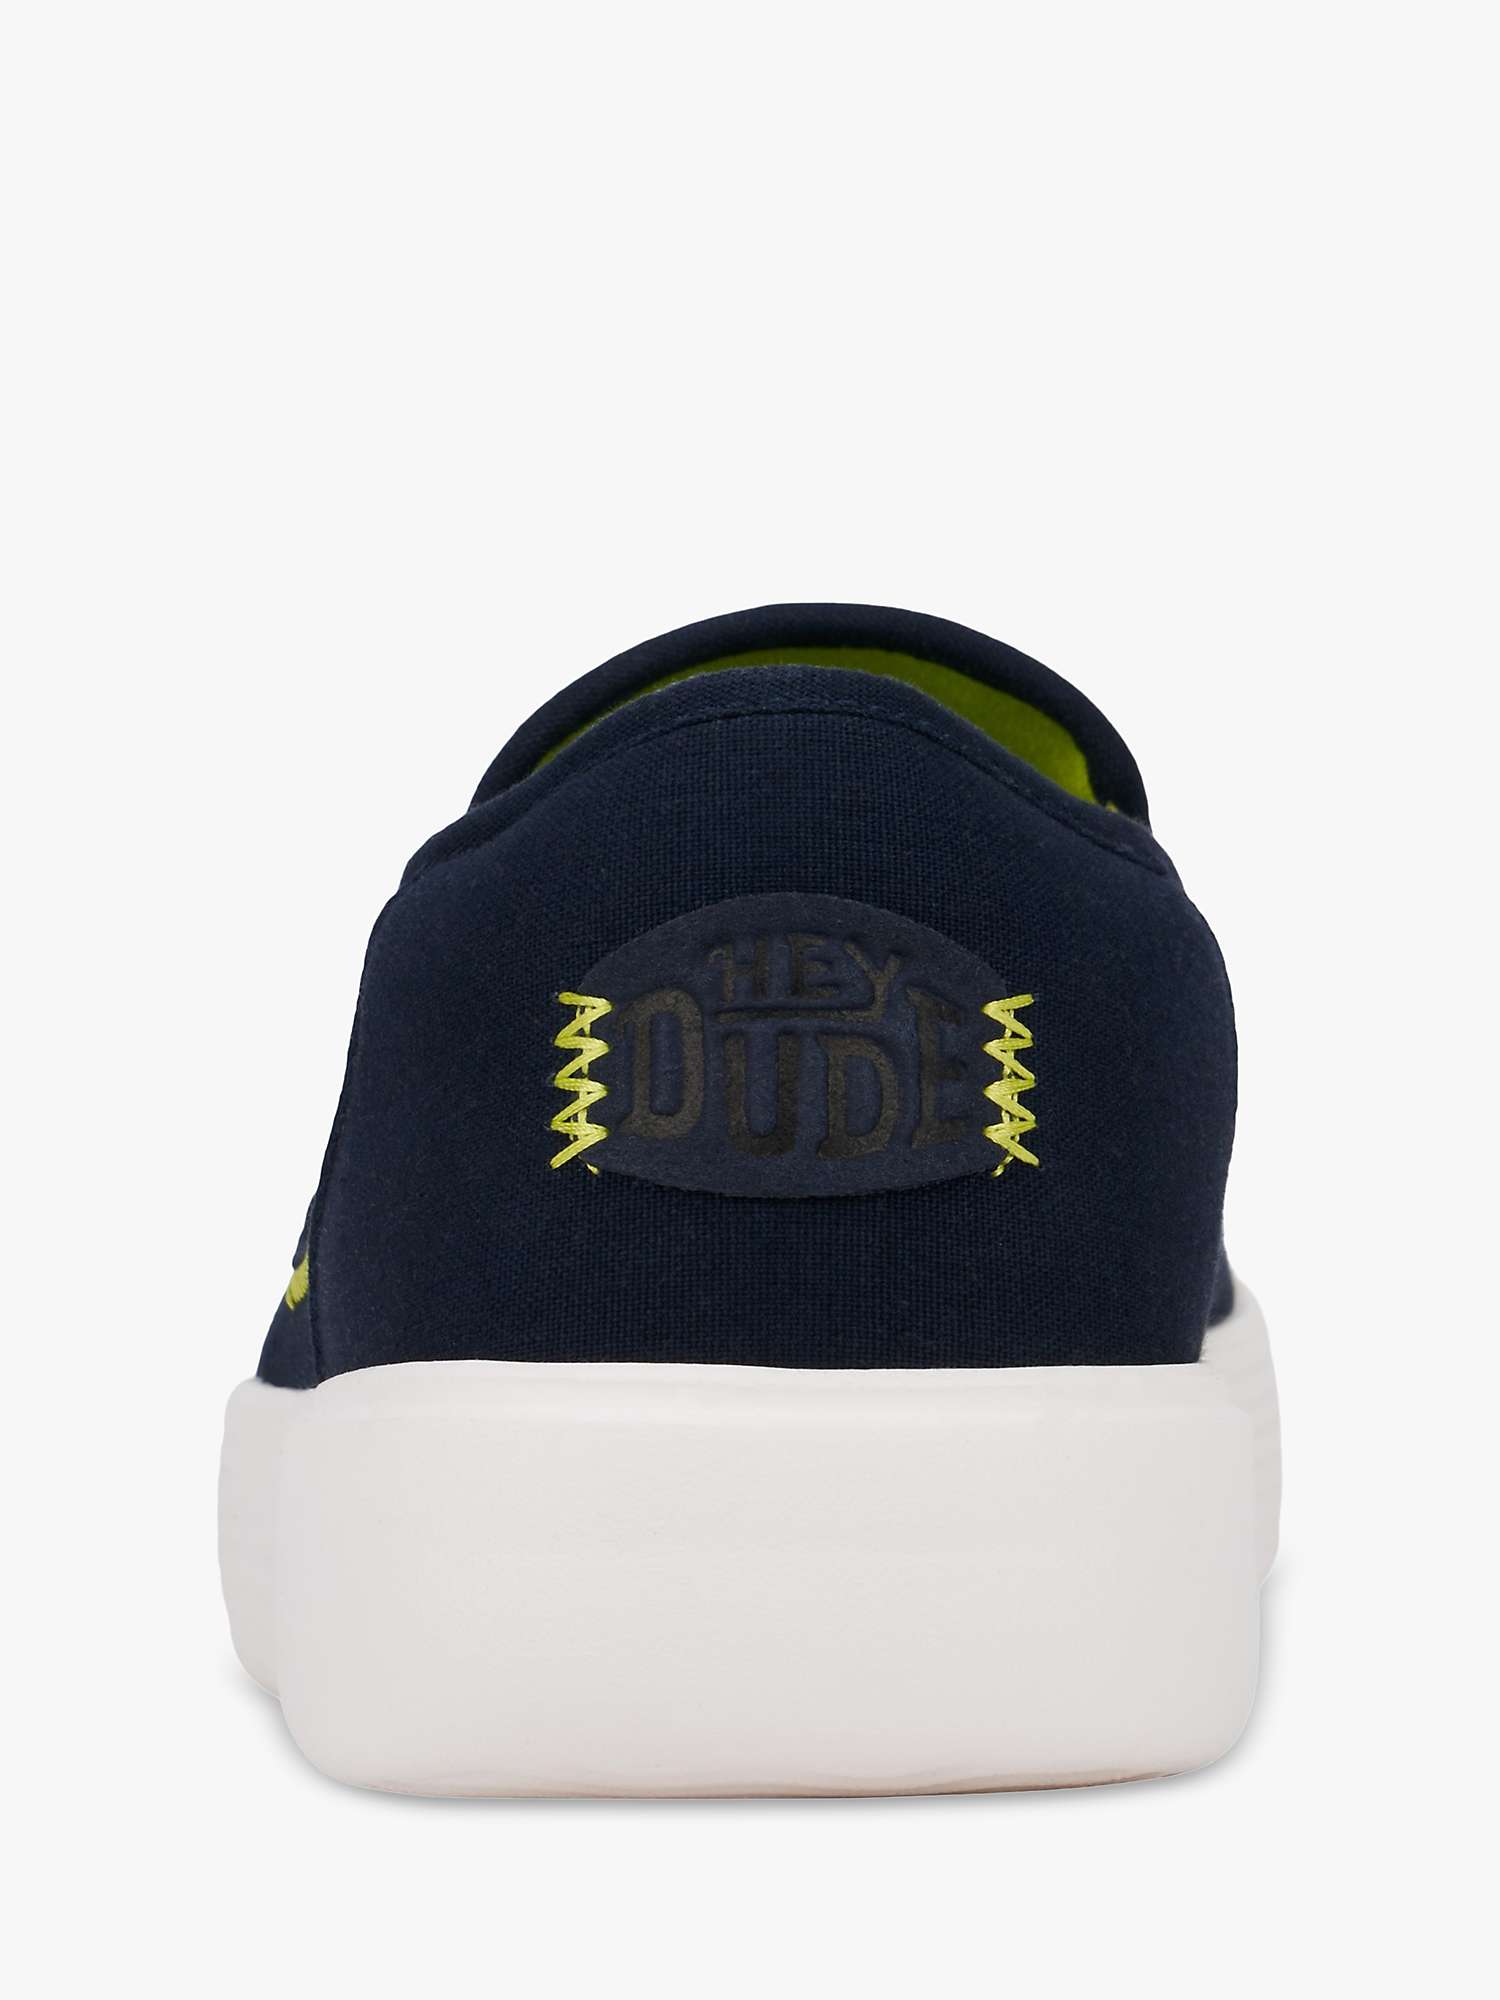 Buy Hey Dude Sunapee Canvas Shoes, Navy Online at johnlewis.com